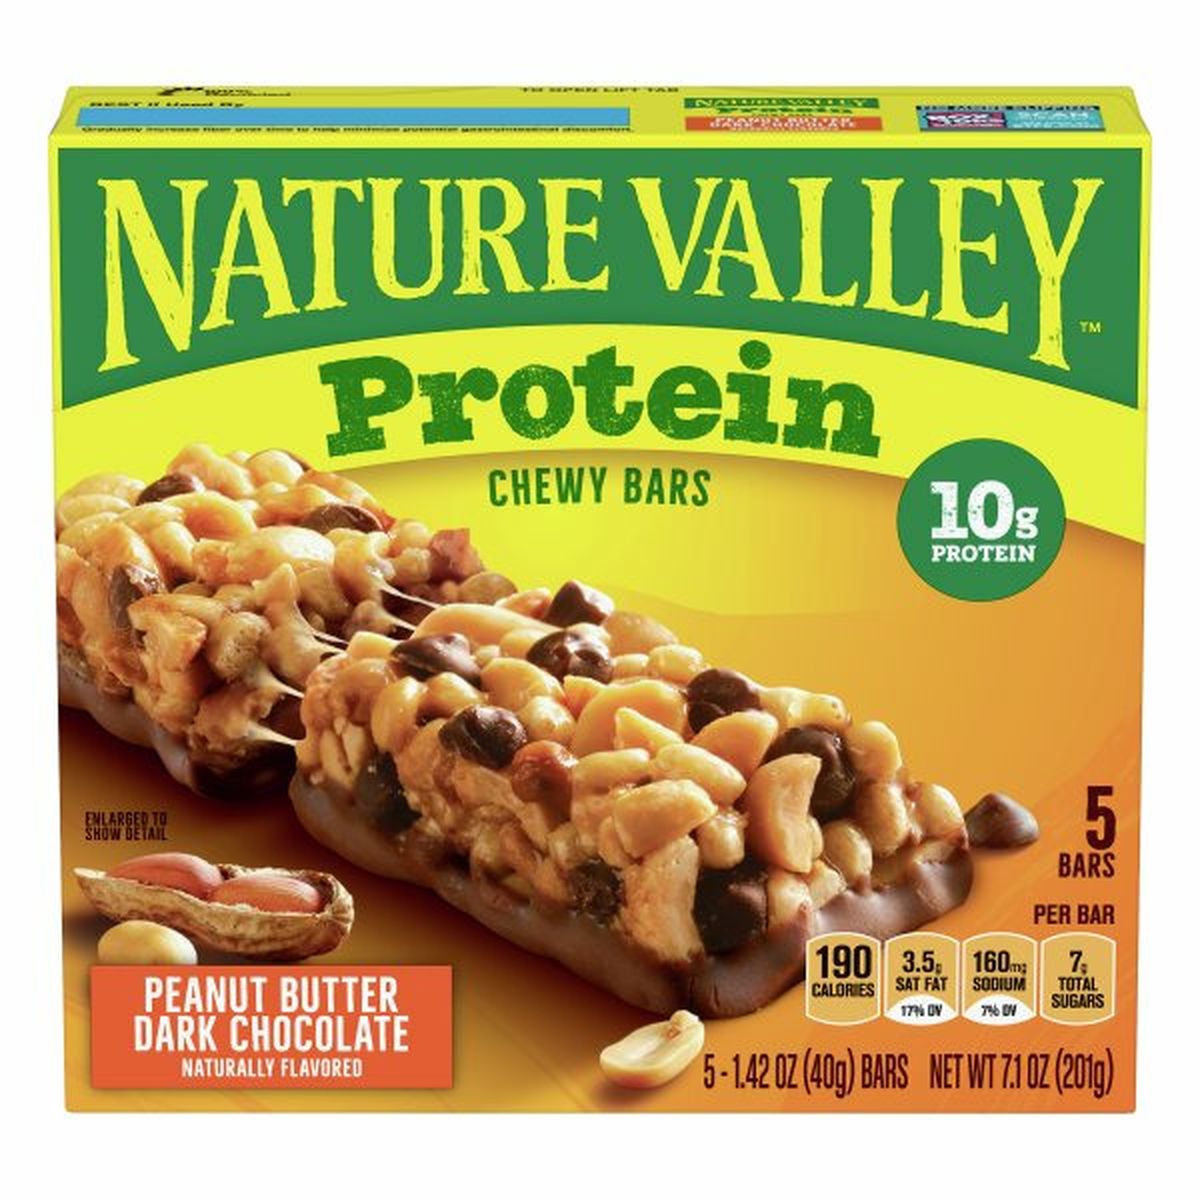 Calories in Nature Valley Protein Chewy Bars, Peanut Butter Dark Chocolate